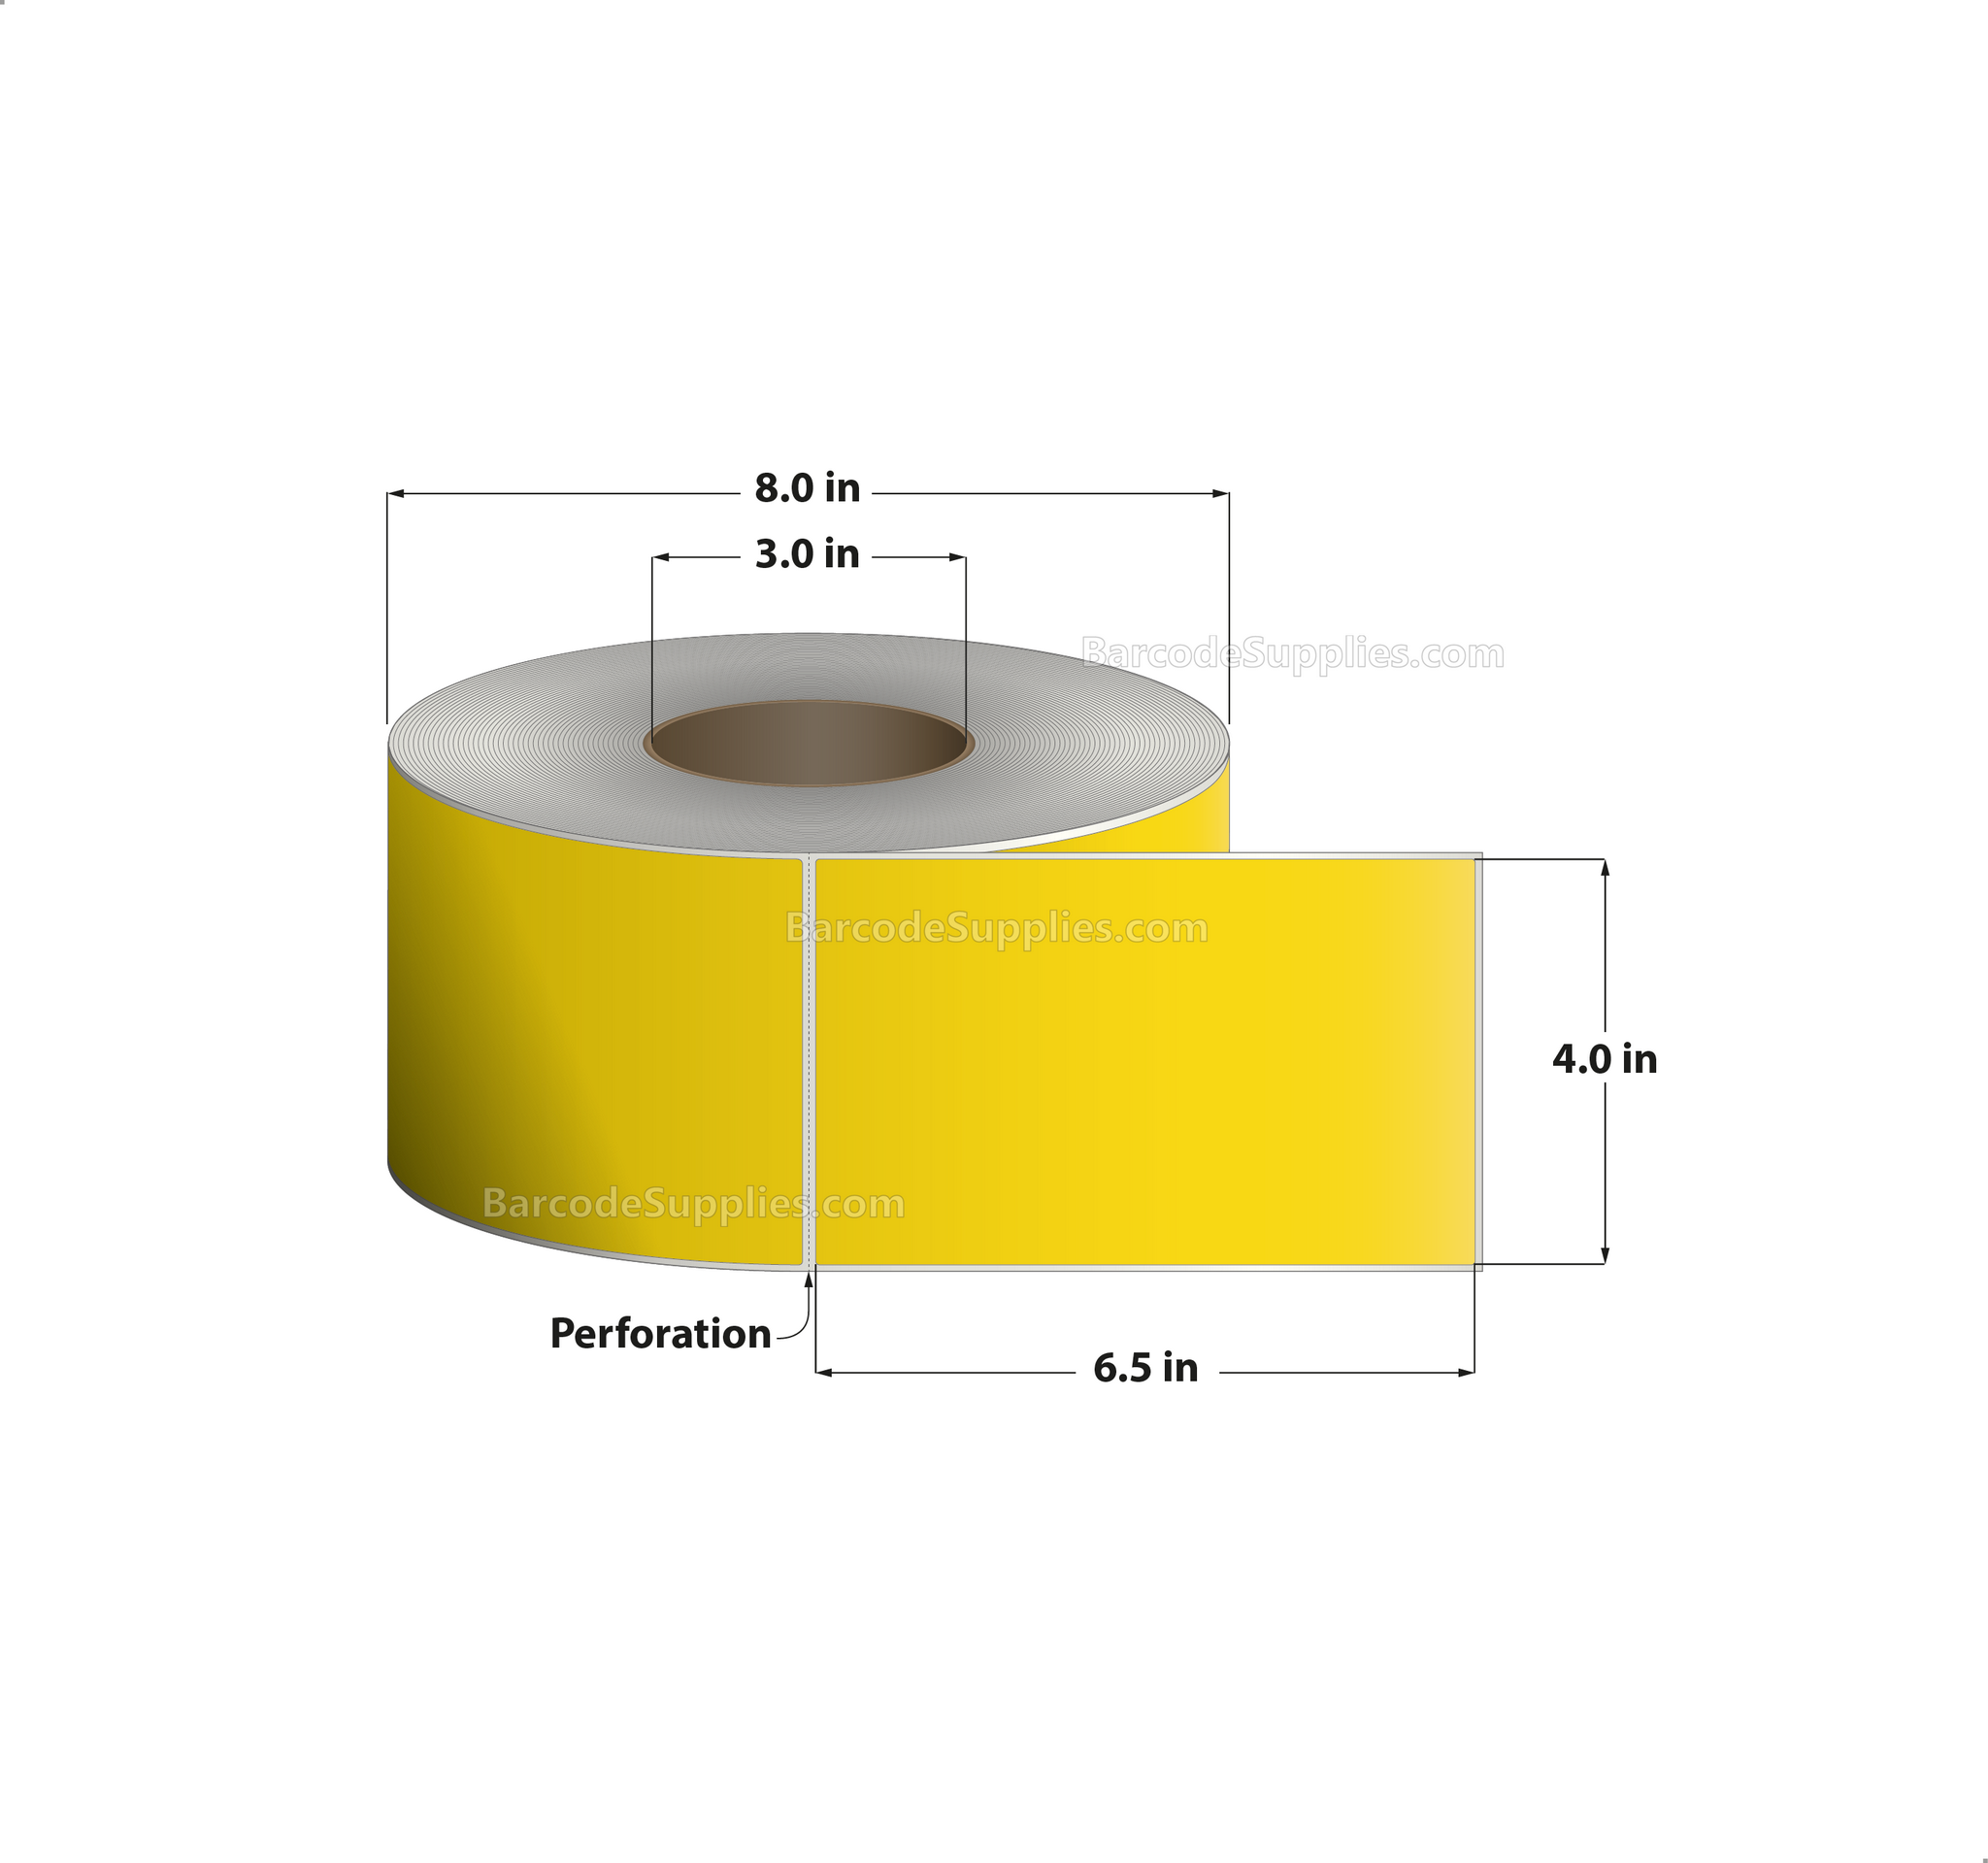 Products 4 x 6.5 Thermal Transfer Pantone Yellow Labels With Permanent Adhesive - Perforated - 900 Labels Per Roll - Carton Of 4 Rolls - 3600 Labels Total - MPN: RFC-4-65-900-YL